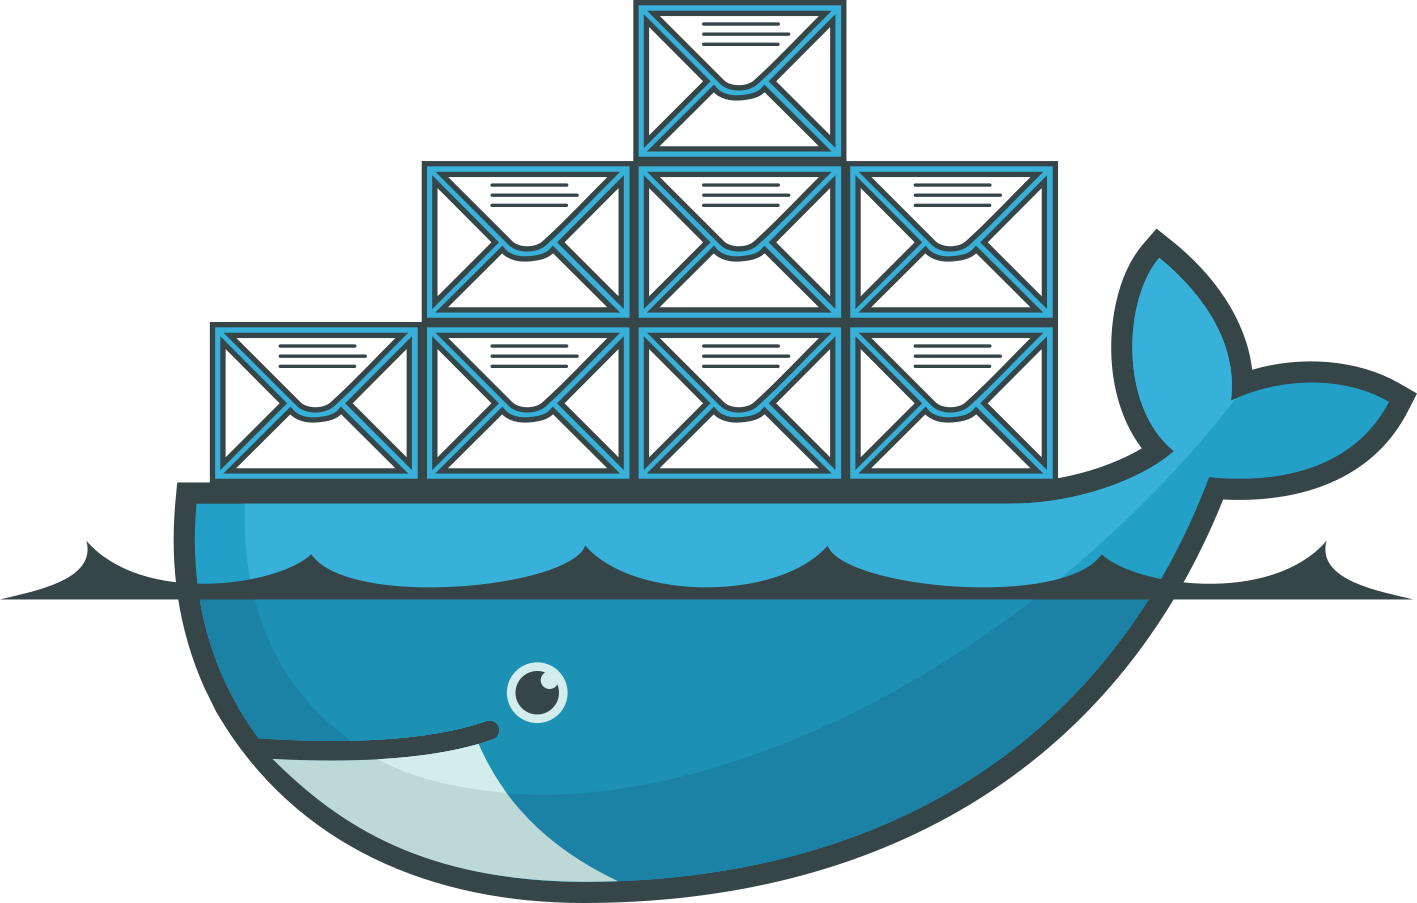 Sending Mails from within a Docker Container